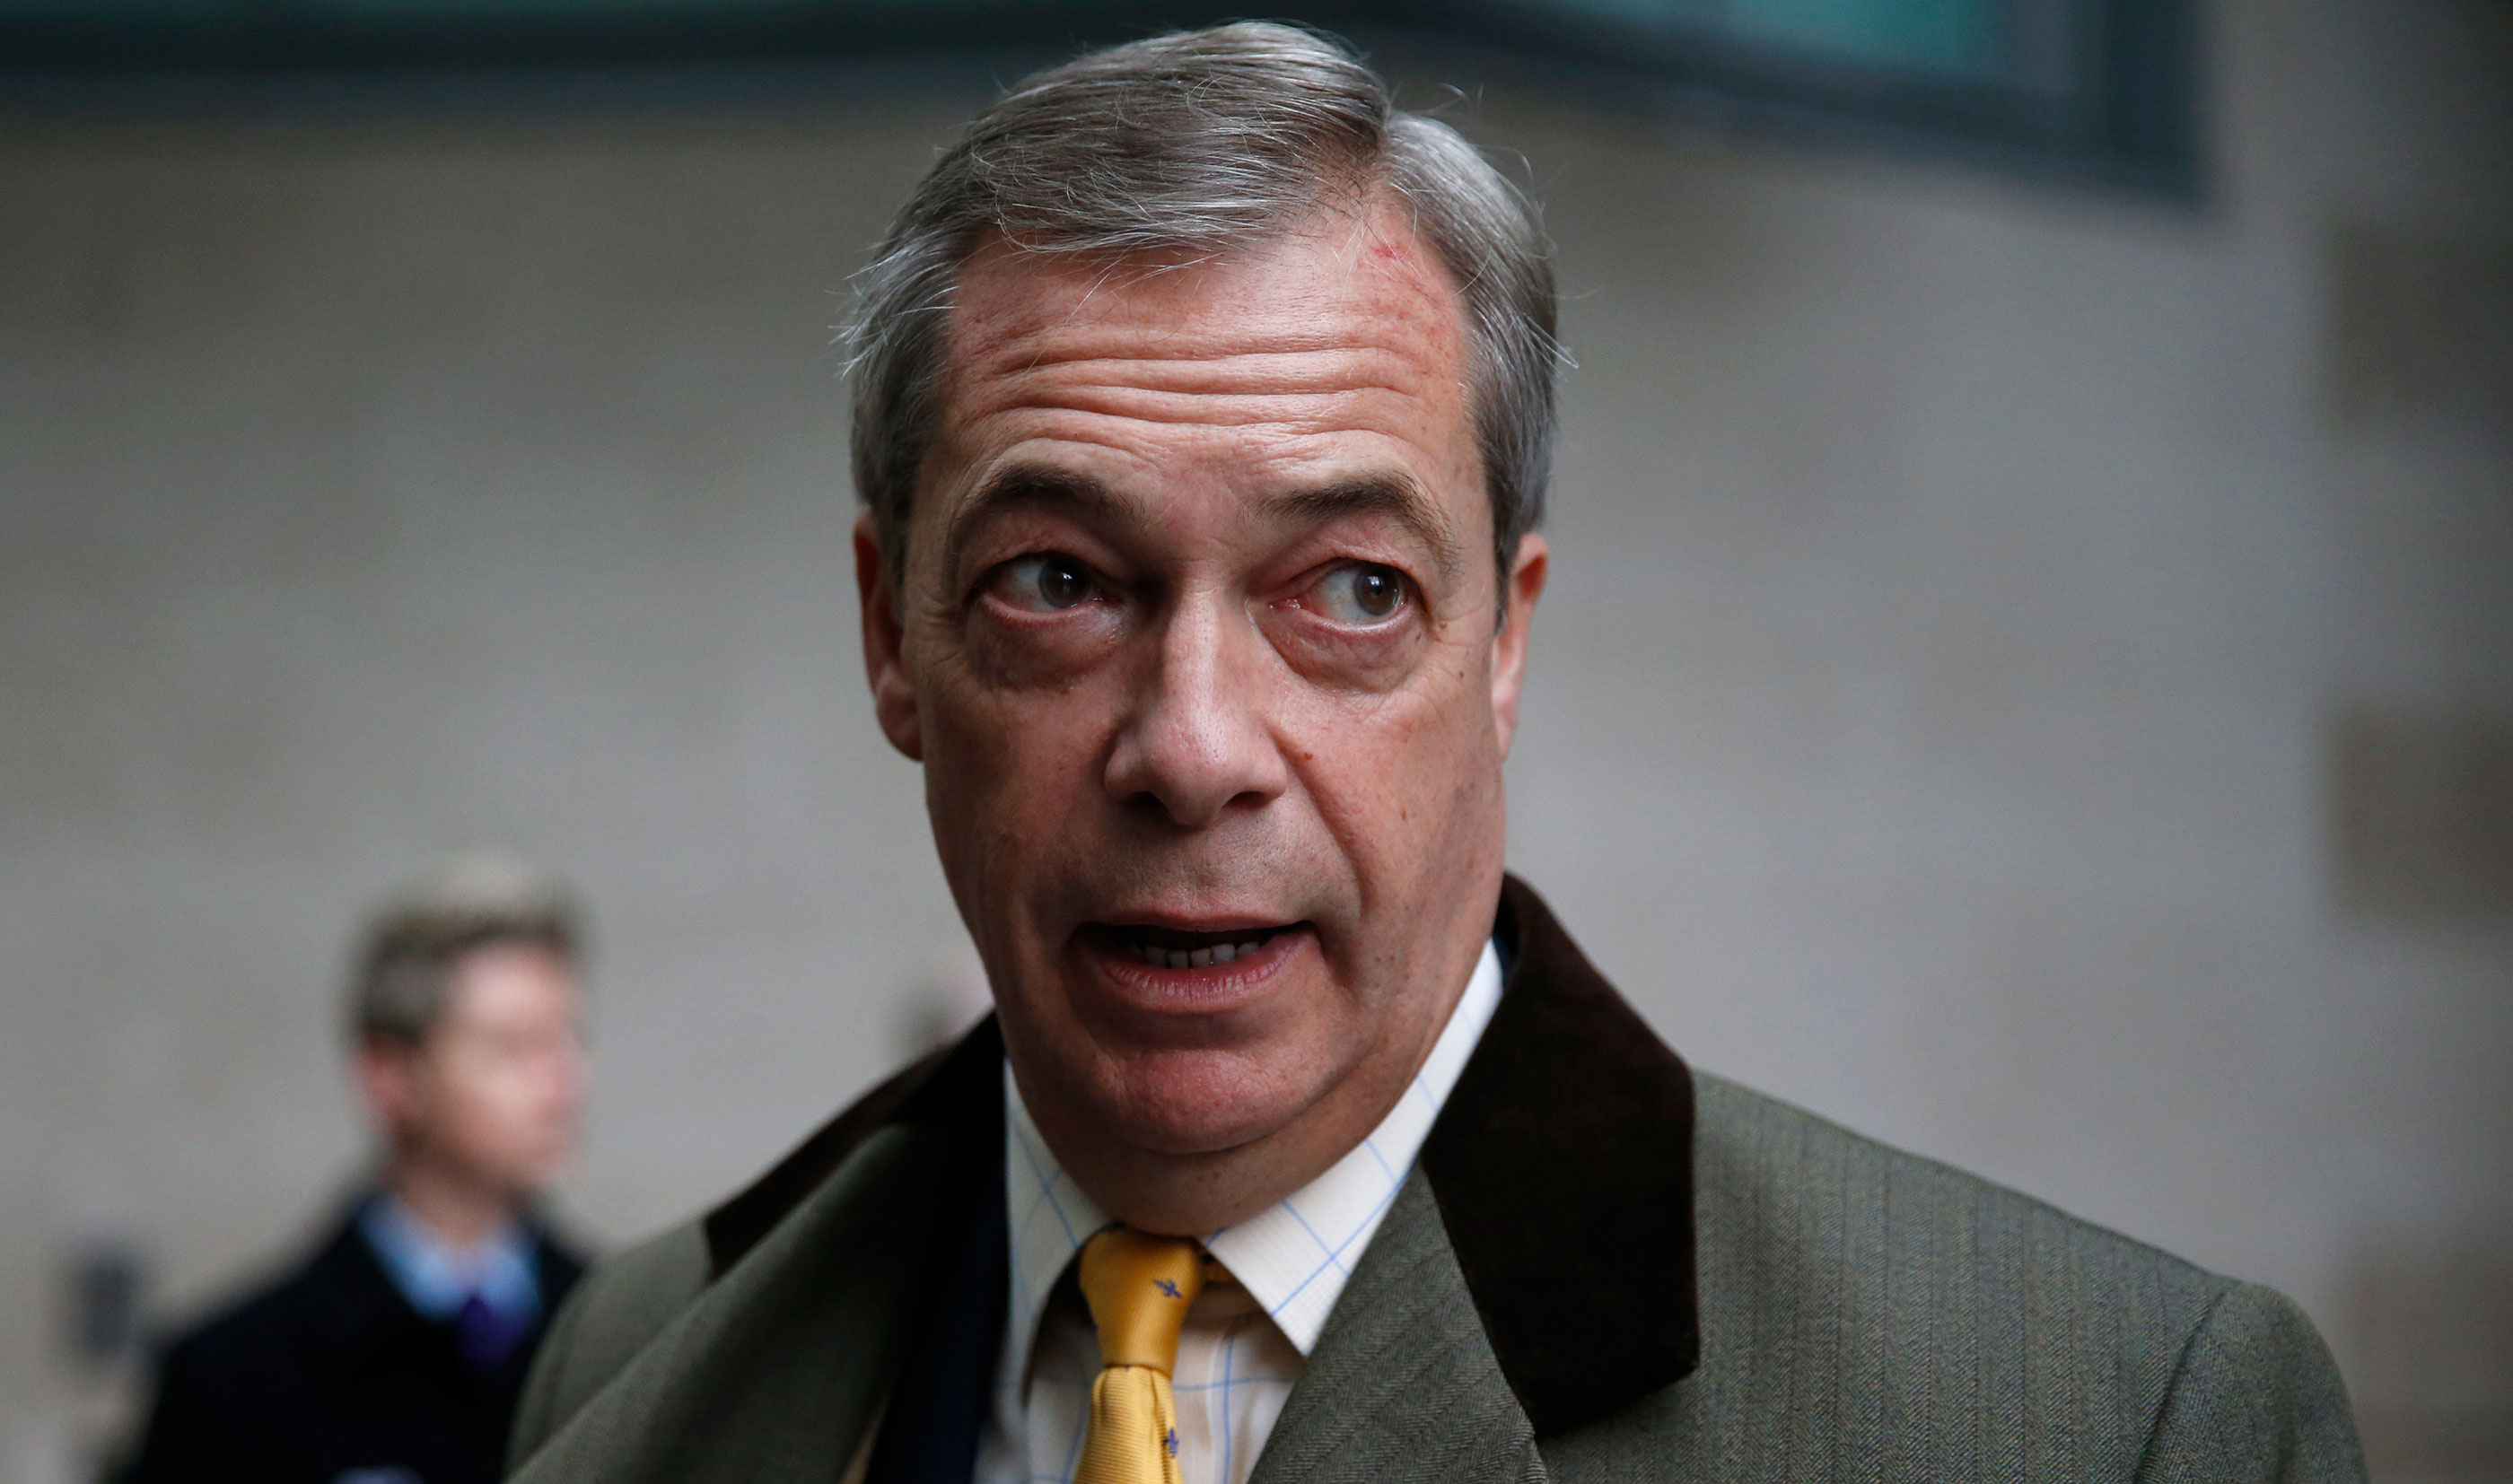 Brexit Party leader Nigel Farage arrives to a television appearance on February 2 in London, England. 